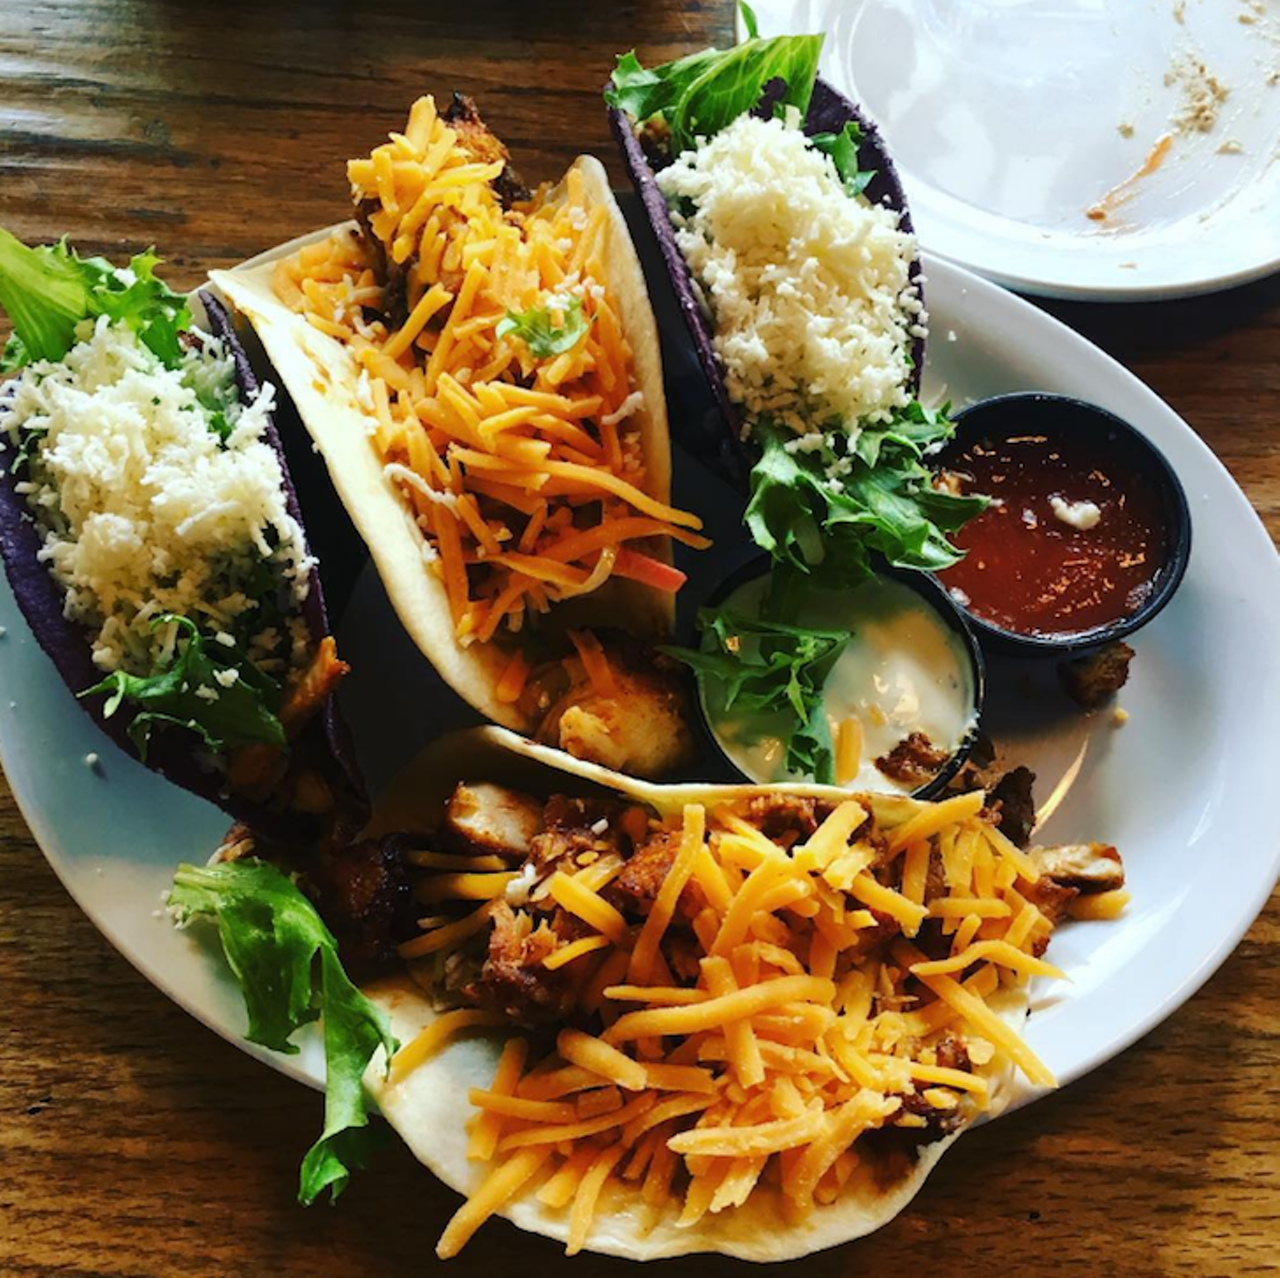  Winter Park Fish Company
761 N Orange Ave, Winter Park, (407) 622-6112
$2 fish tacos on Tuesdays make the waitlist worth it at this neighborhood fish joint. Just make sure to get there early with a parking strategy in place. 
Photo via mydeff1225/Instagram